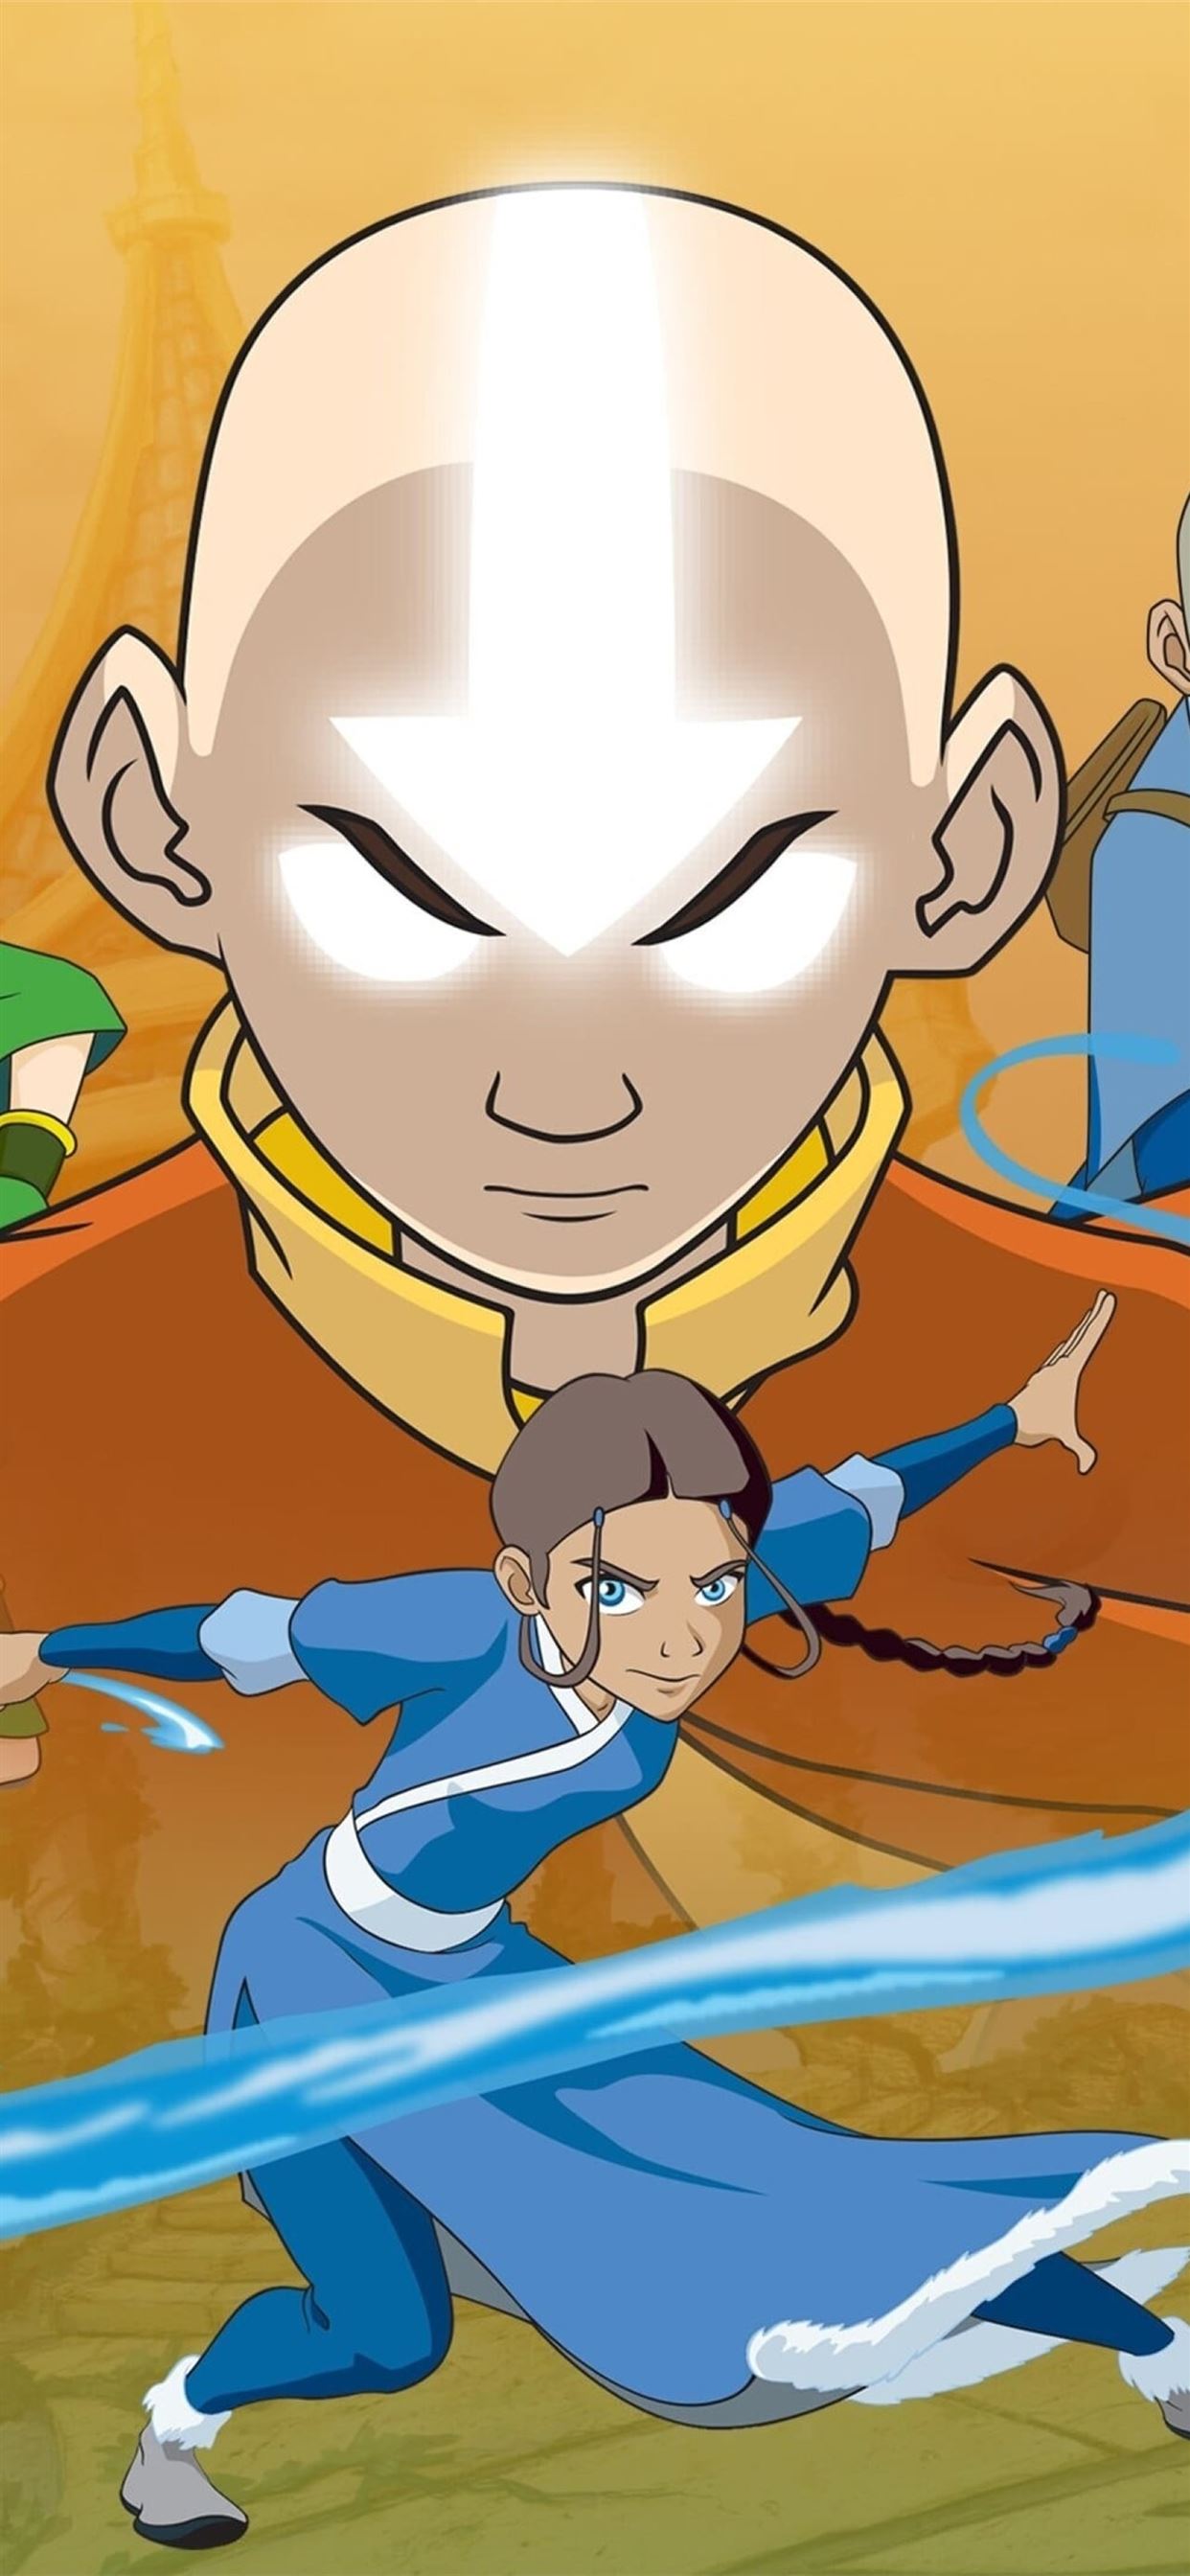 Wallpaper ID 376608  Anime Avatar The Last Airbender Phone Wallpaper  Aang Avatar 1080x2160 free download